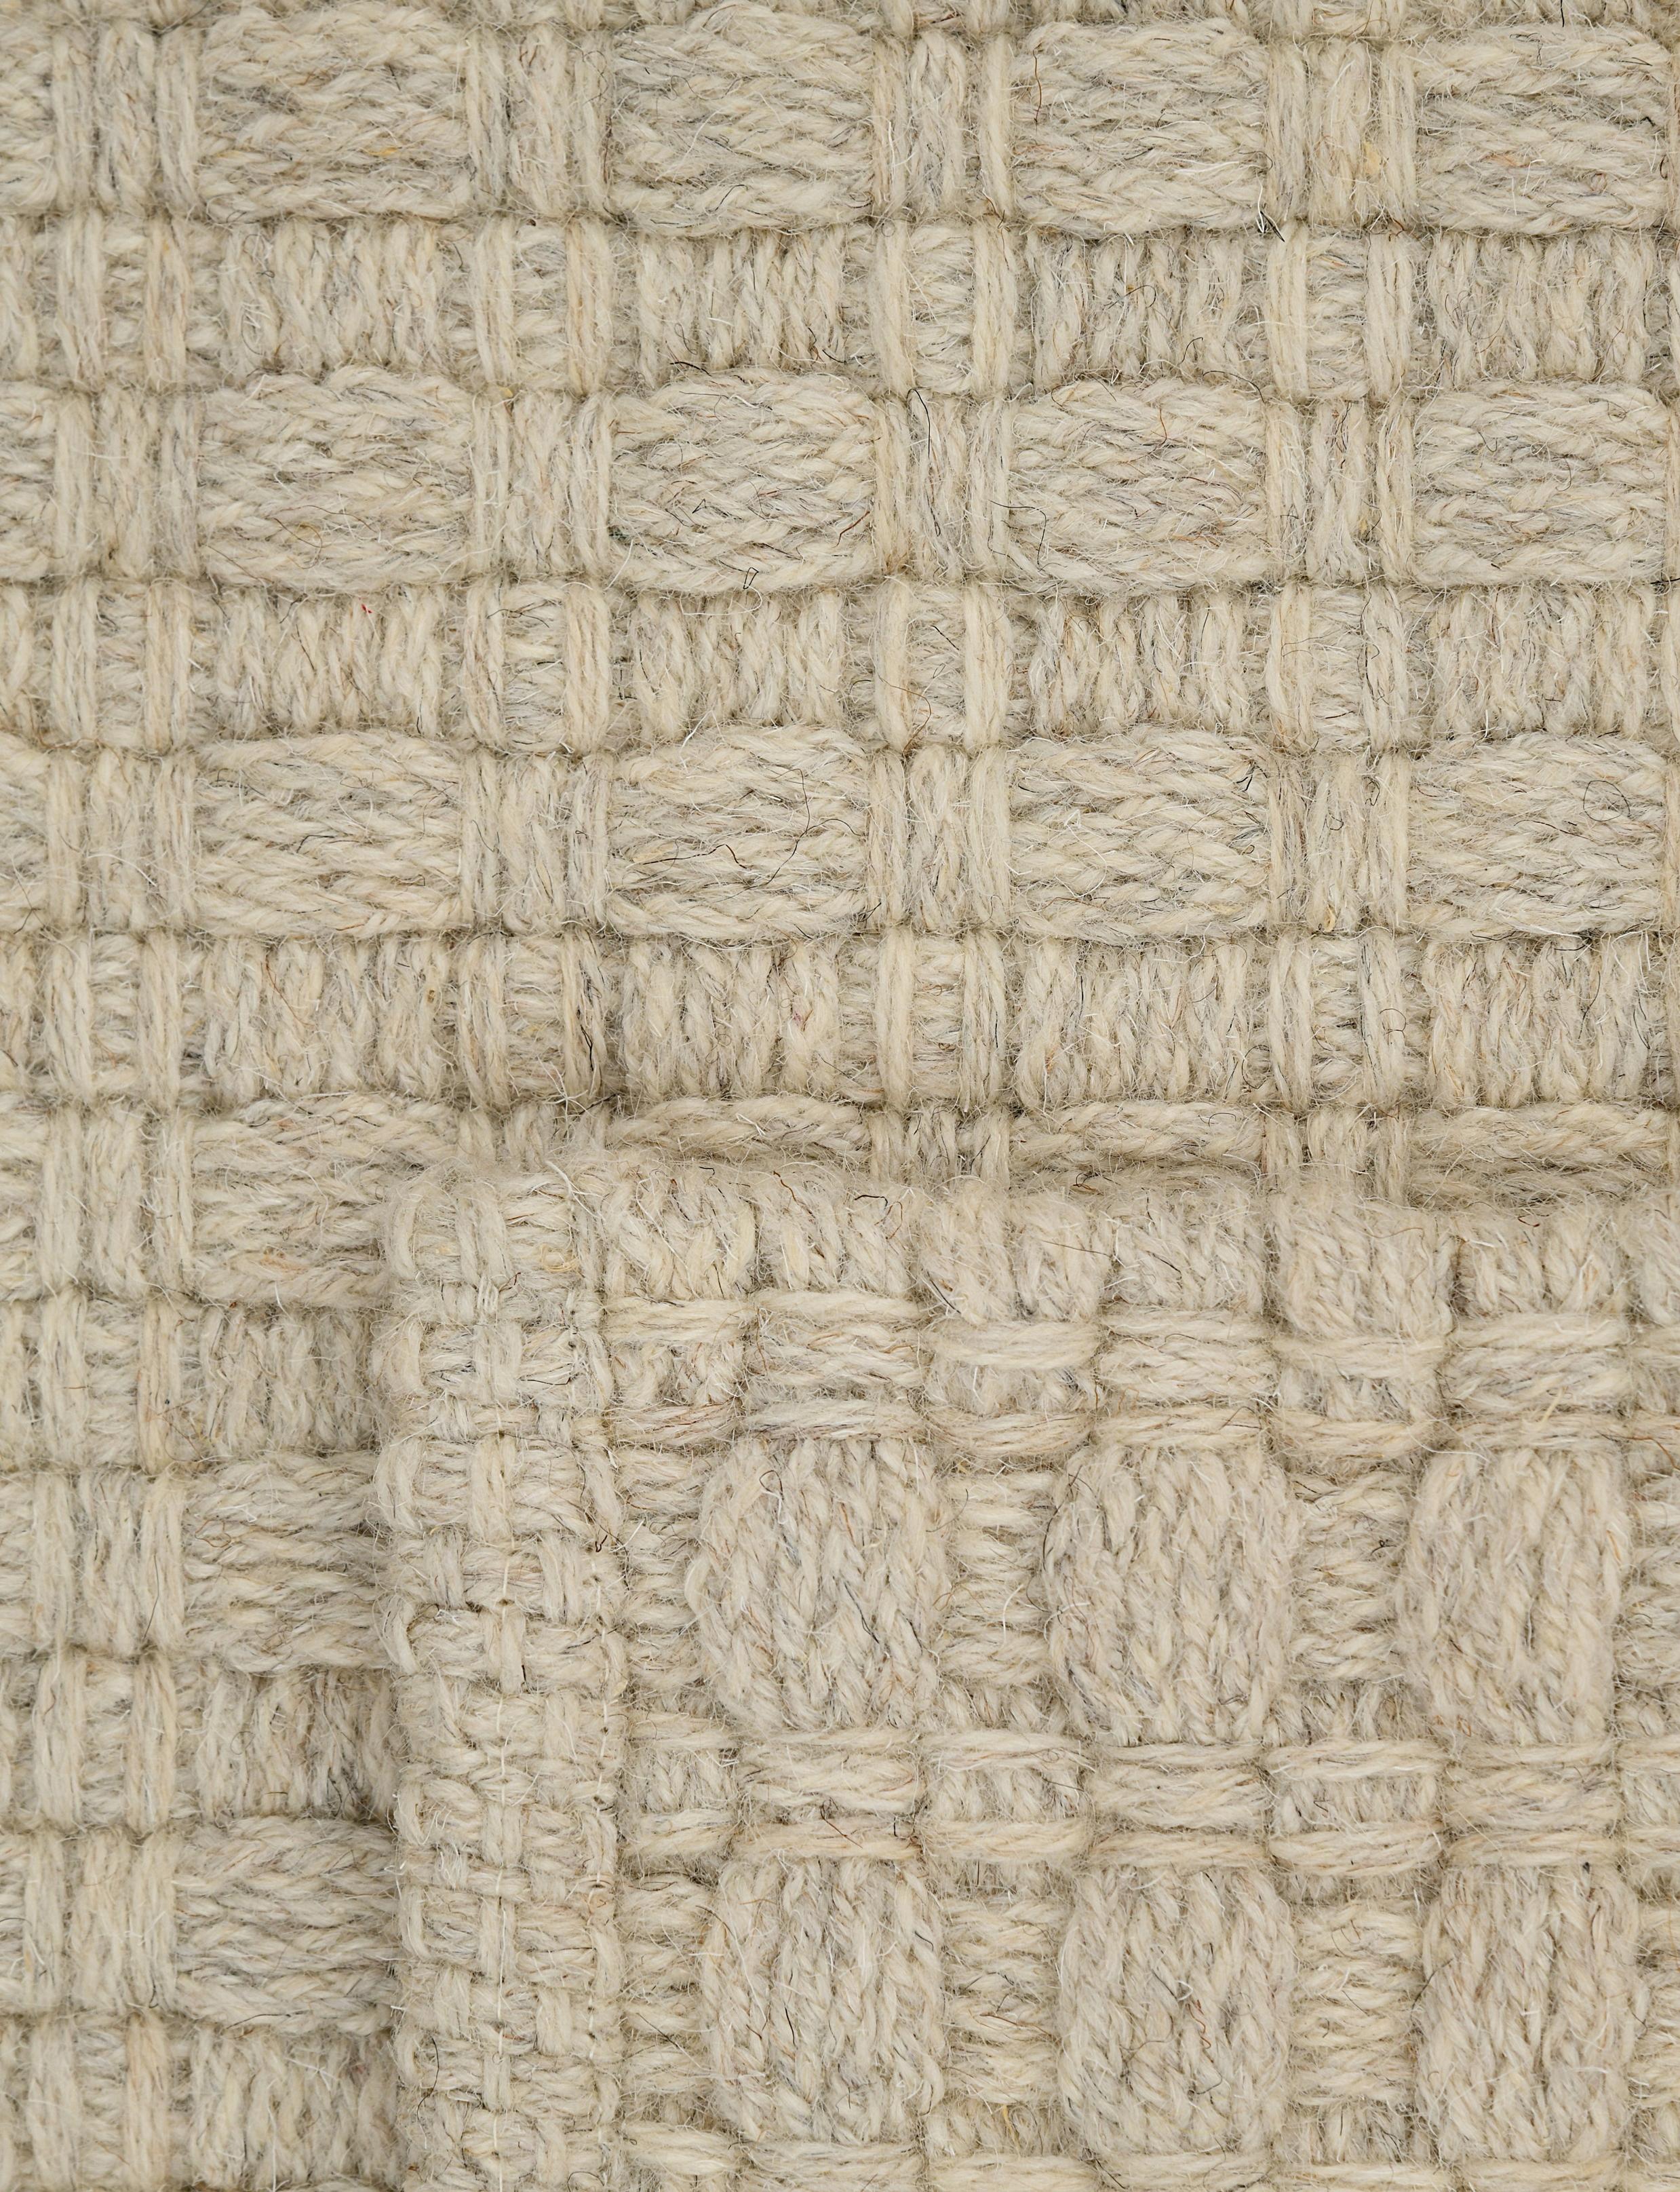 Hand-Woven Una, Ash, Handwoven Face 60% Undyed NZ Wool, 40% Undyed MED Wool, 8' x 10' For Sale